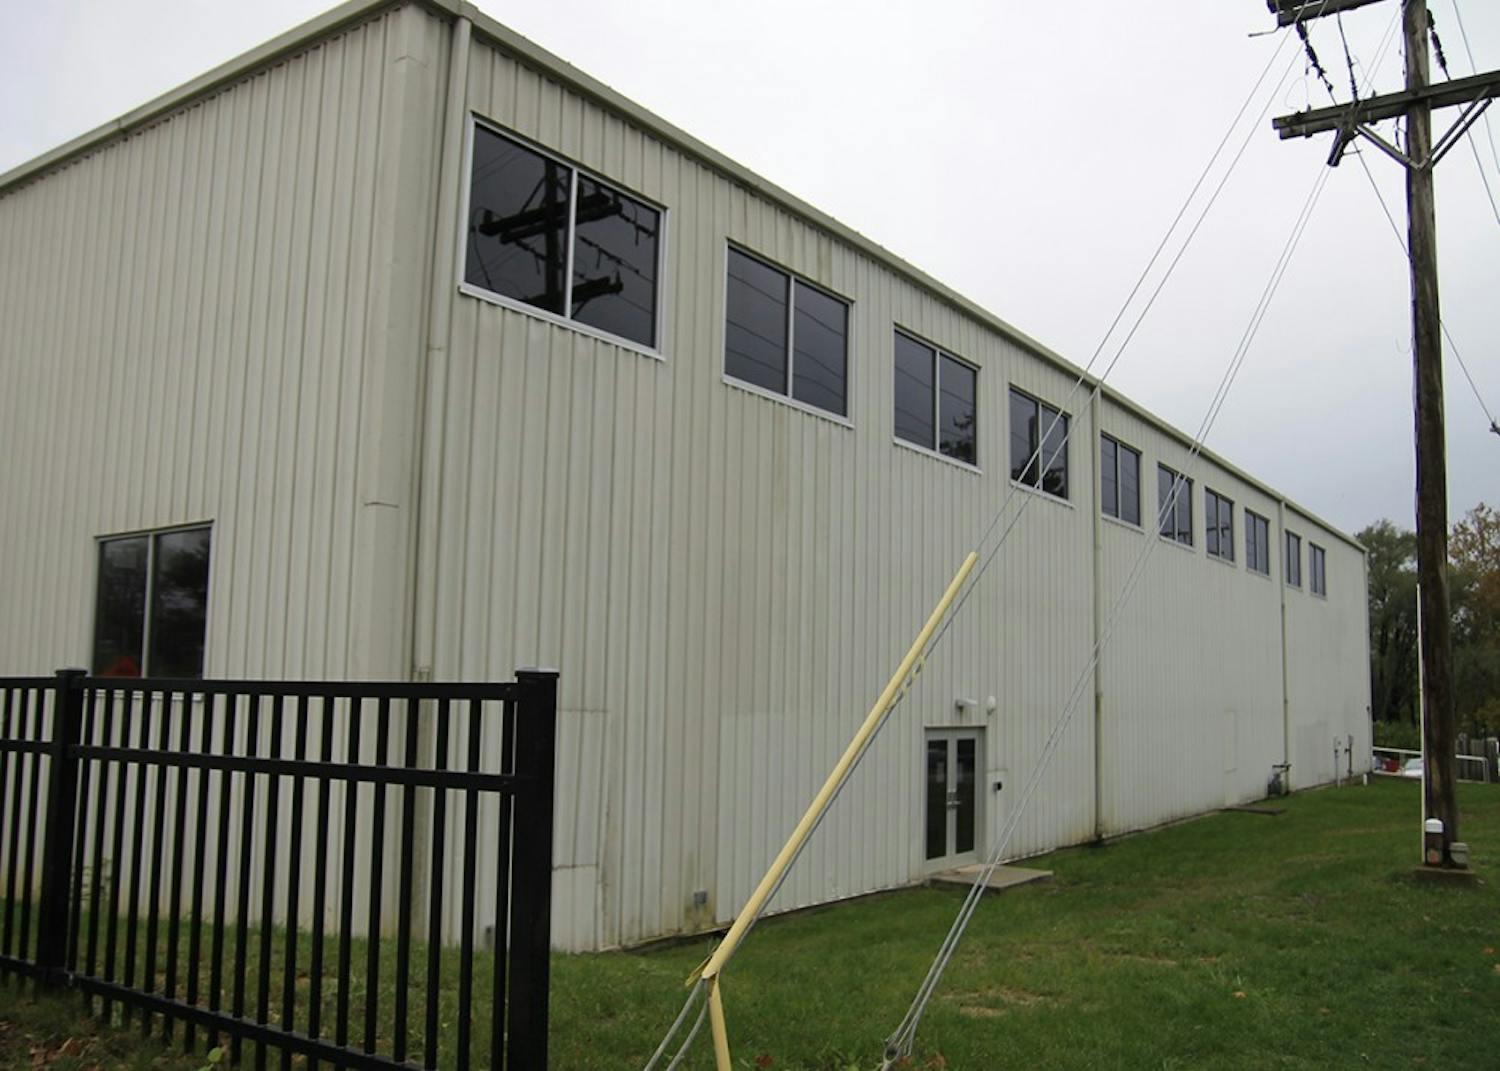 GALLERY: Painting studios to be moved farther off campus